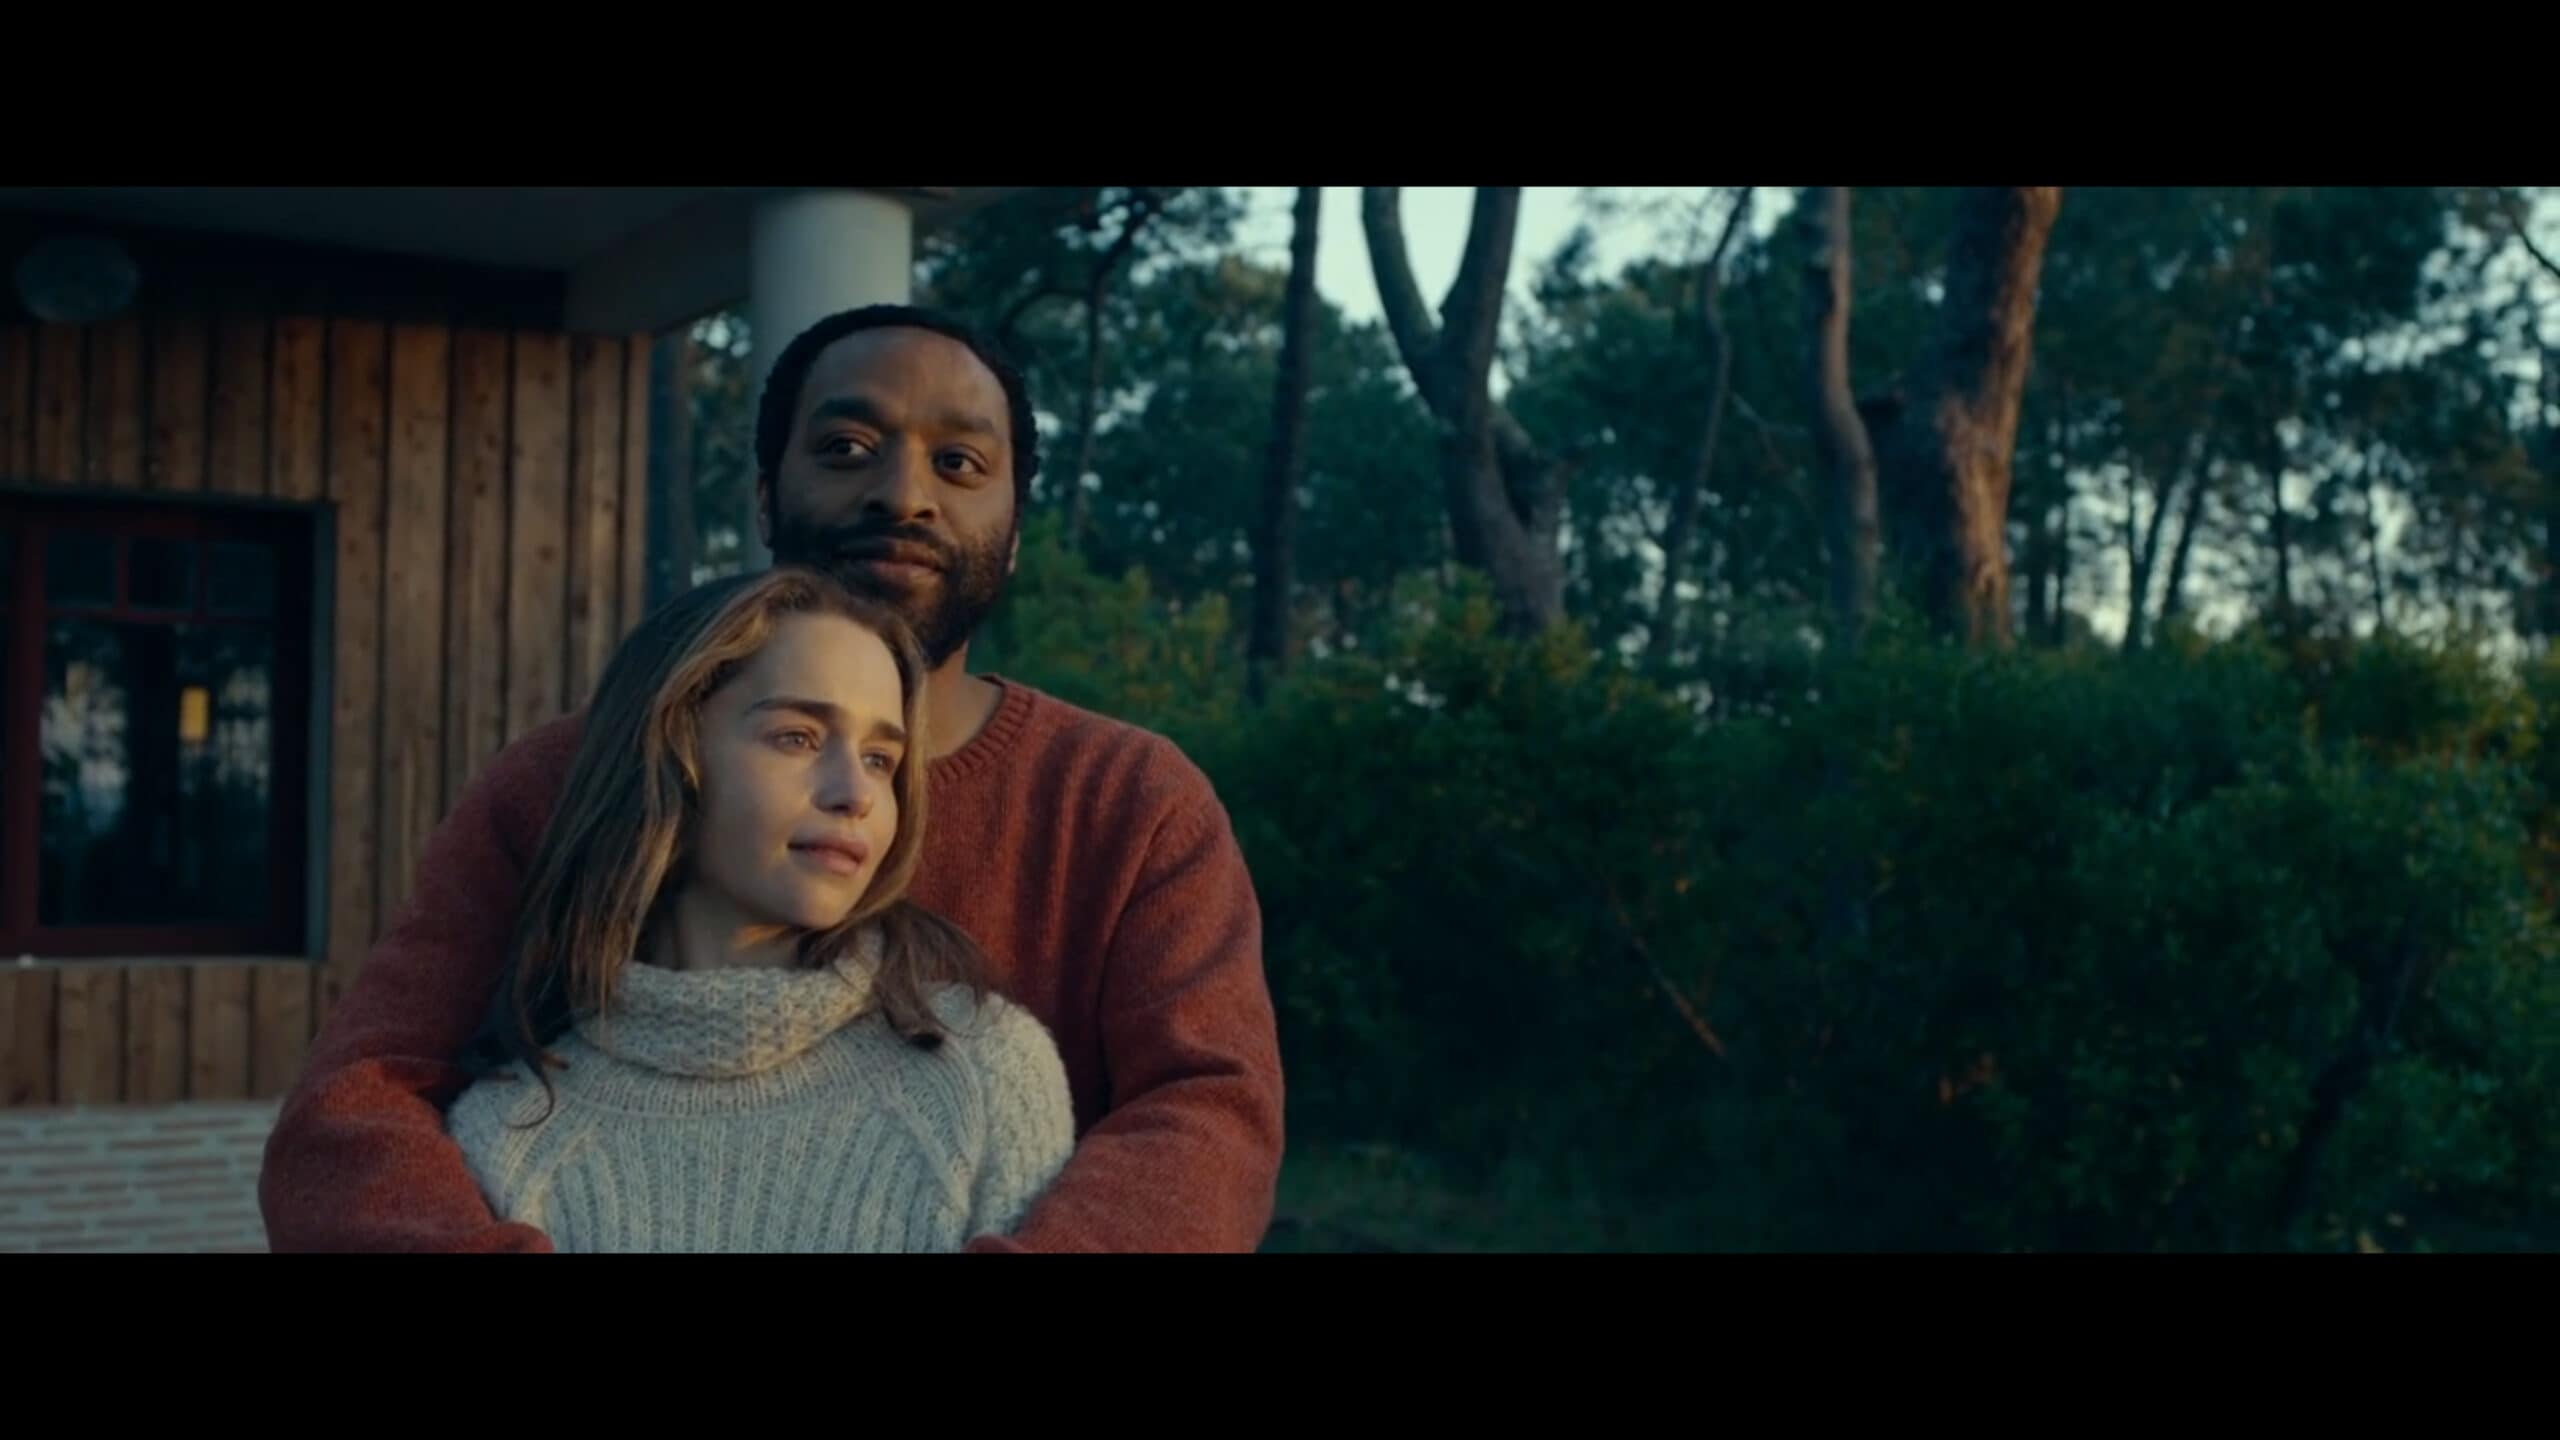 Rachel (Emilia Clarke) and Alvy (Chiwetel Ejiofor) enjoying the views of their second home